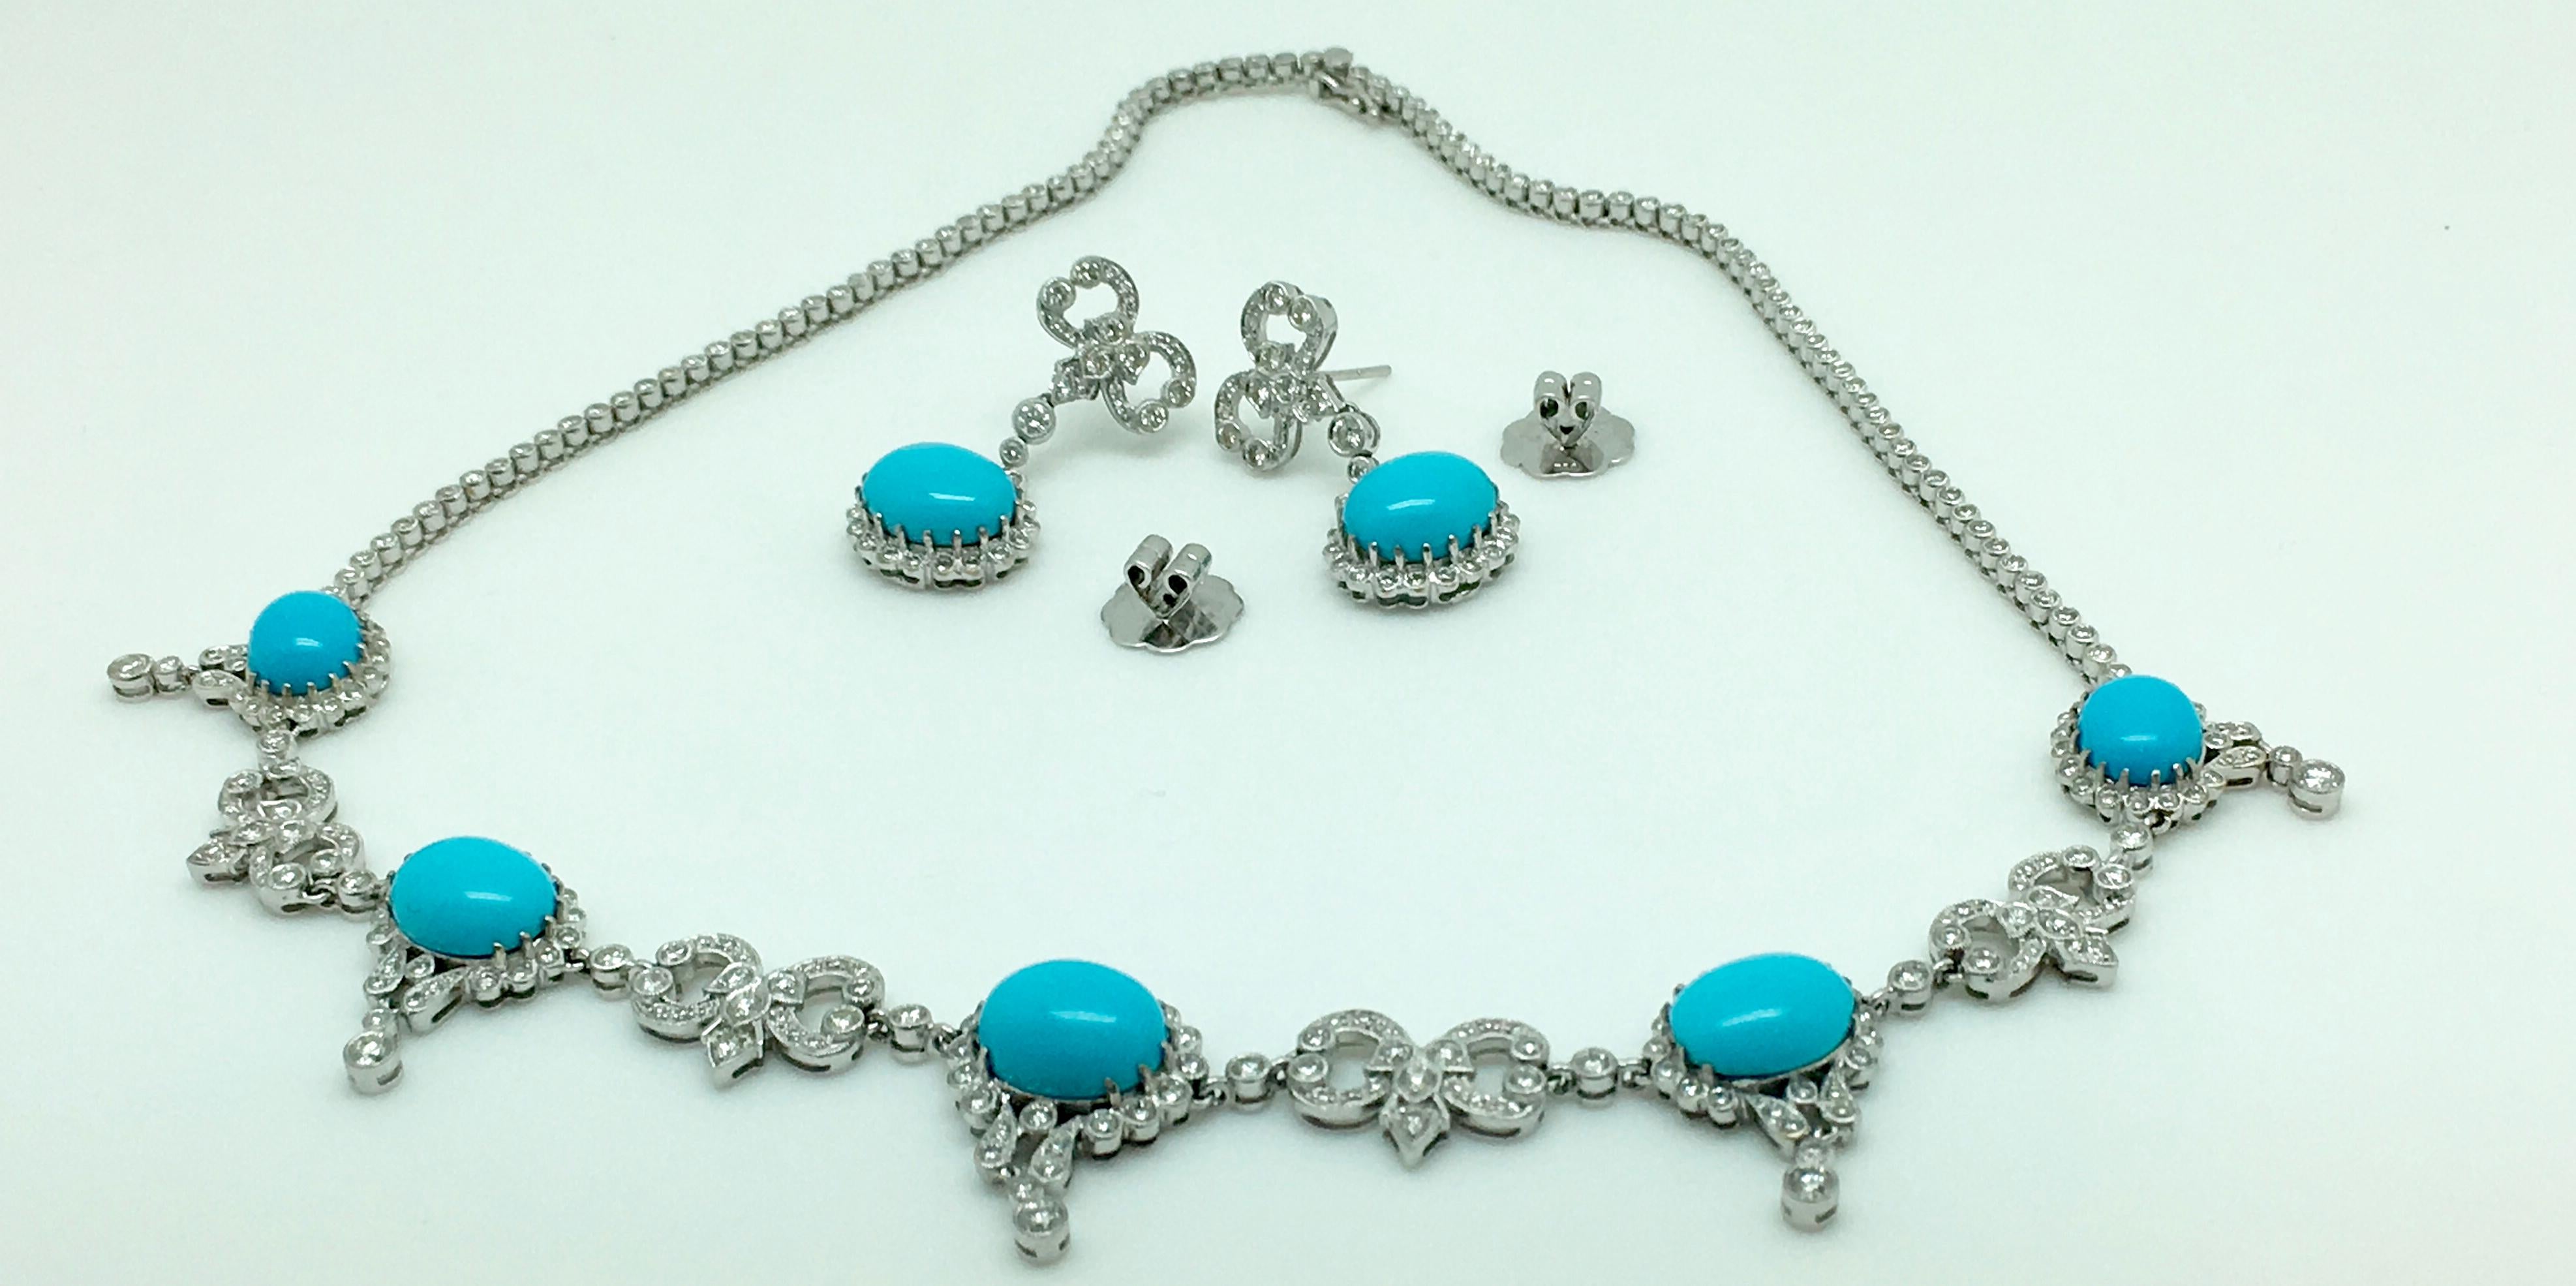 Turquoise and Diamond Necklace with Matching Earrings 18 Karat White Gold In Excellent Condition For Sale In Nashville, TN